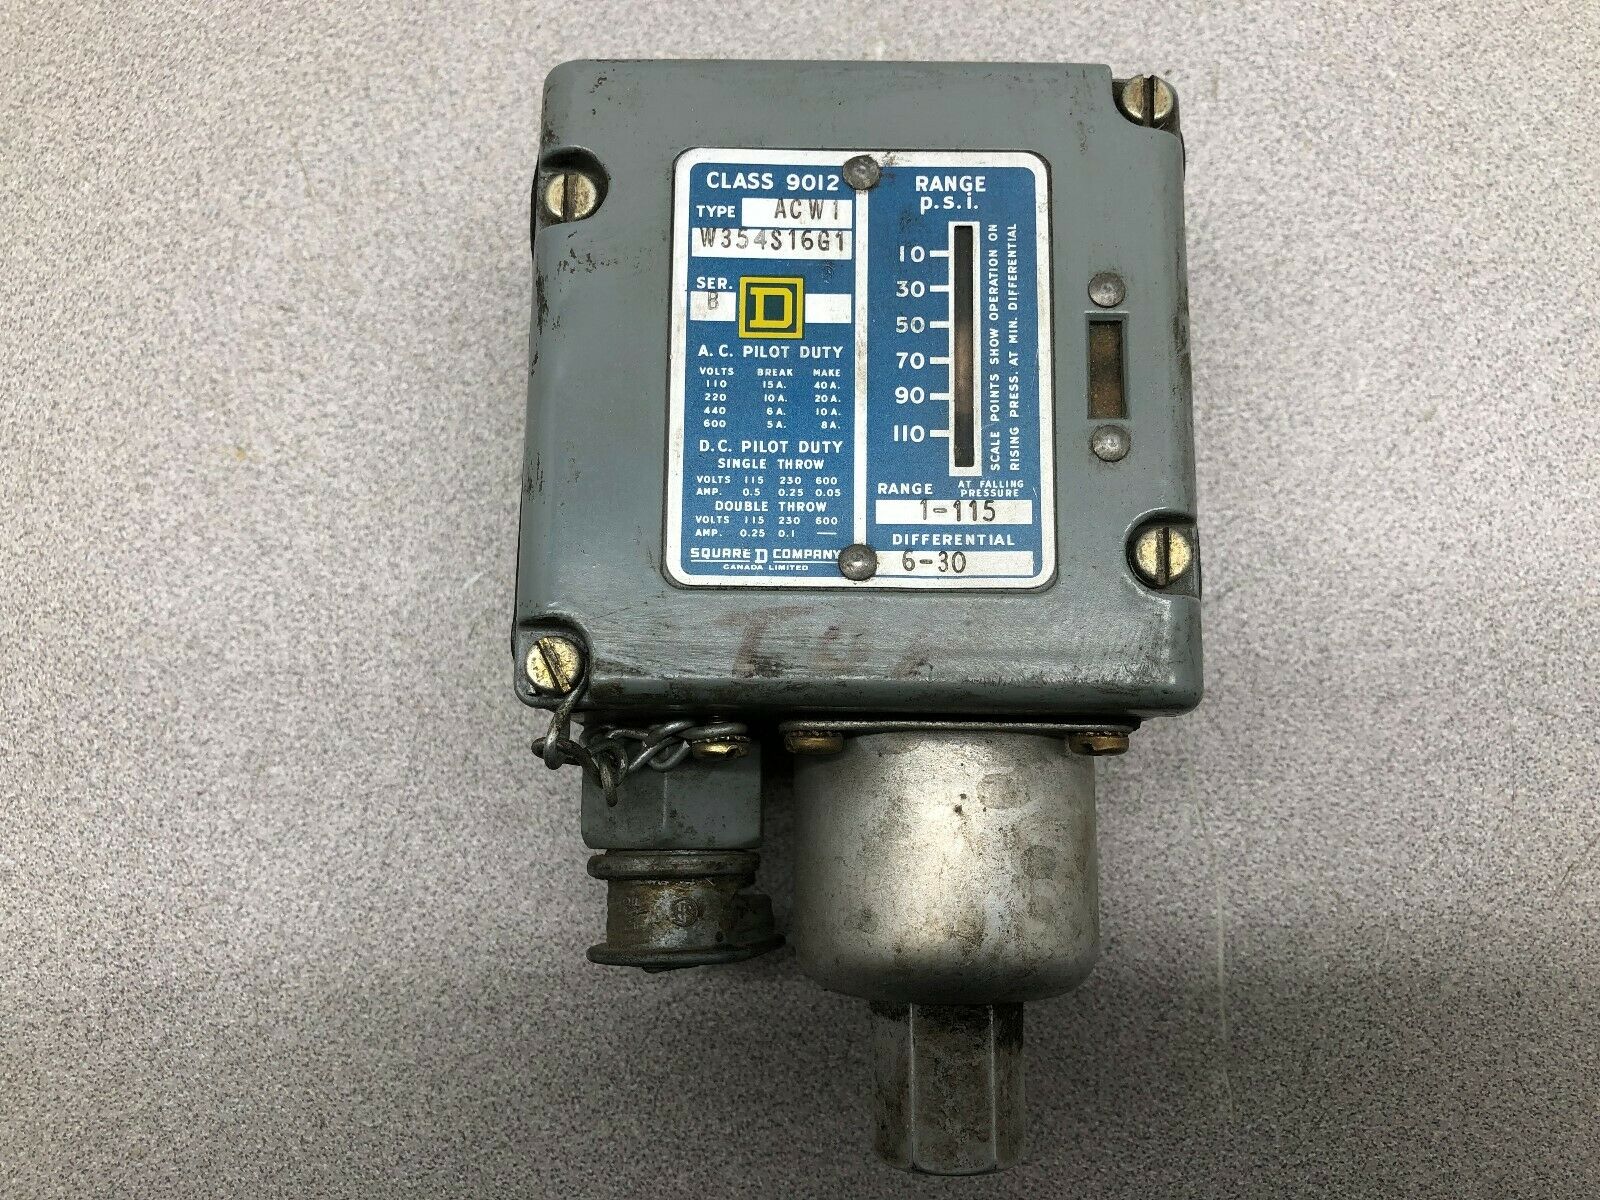 USED SQUARE D 1-115 PSI 6-30 DIFFERENTIAL PRESSURE SWITCH 9012-ACW1